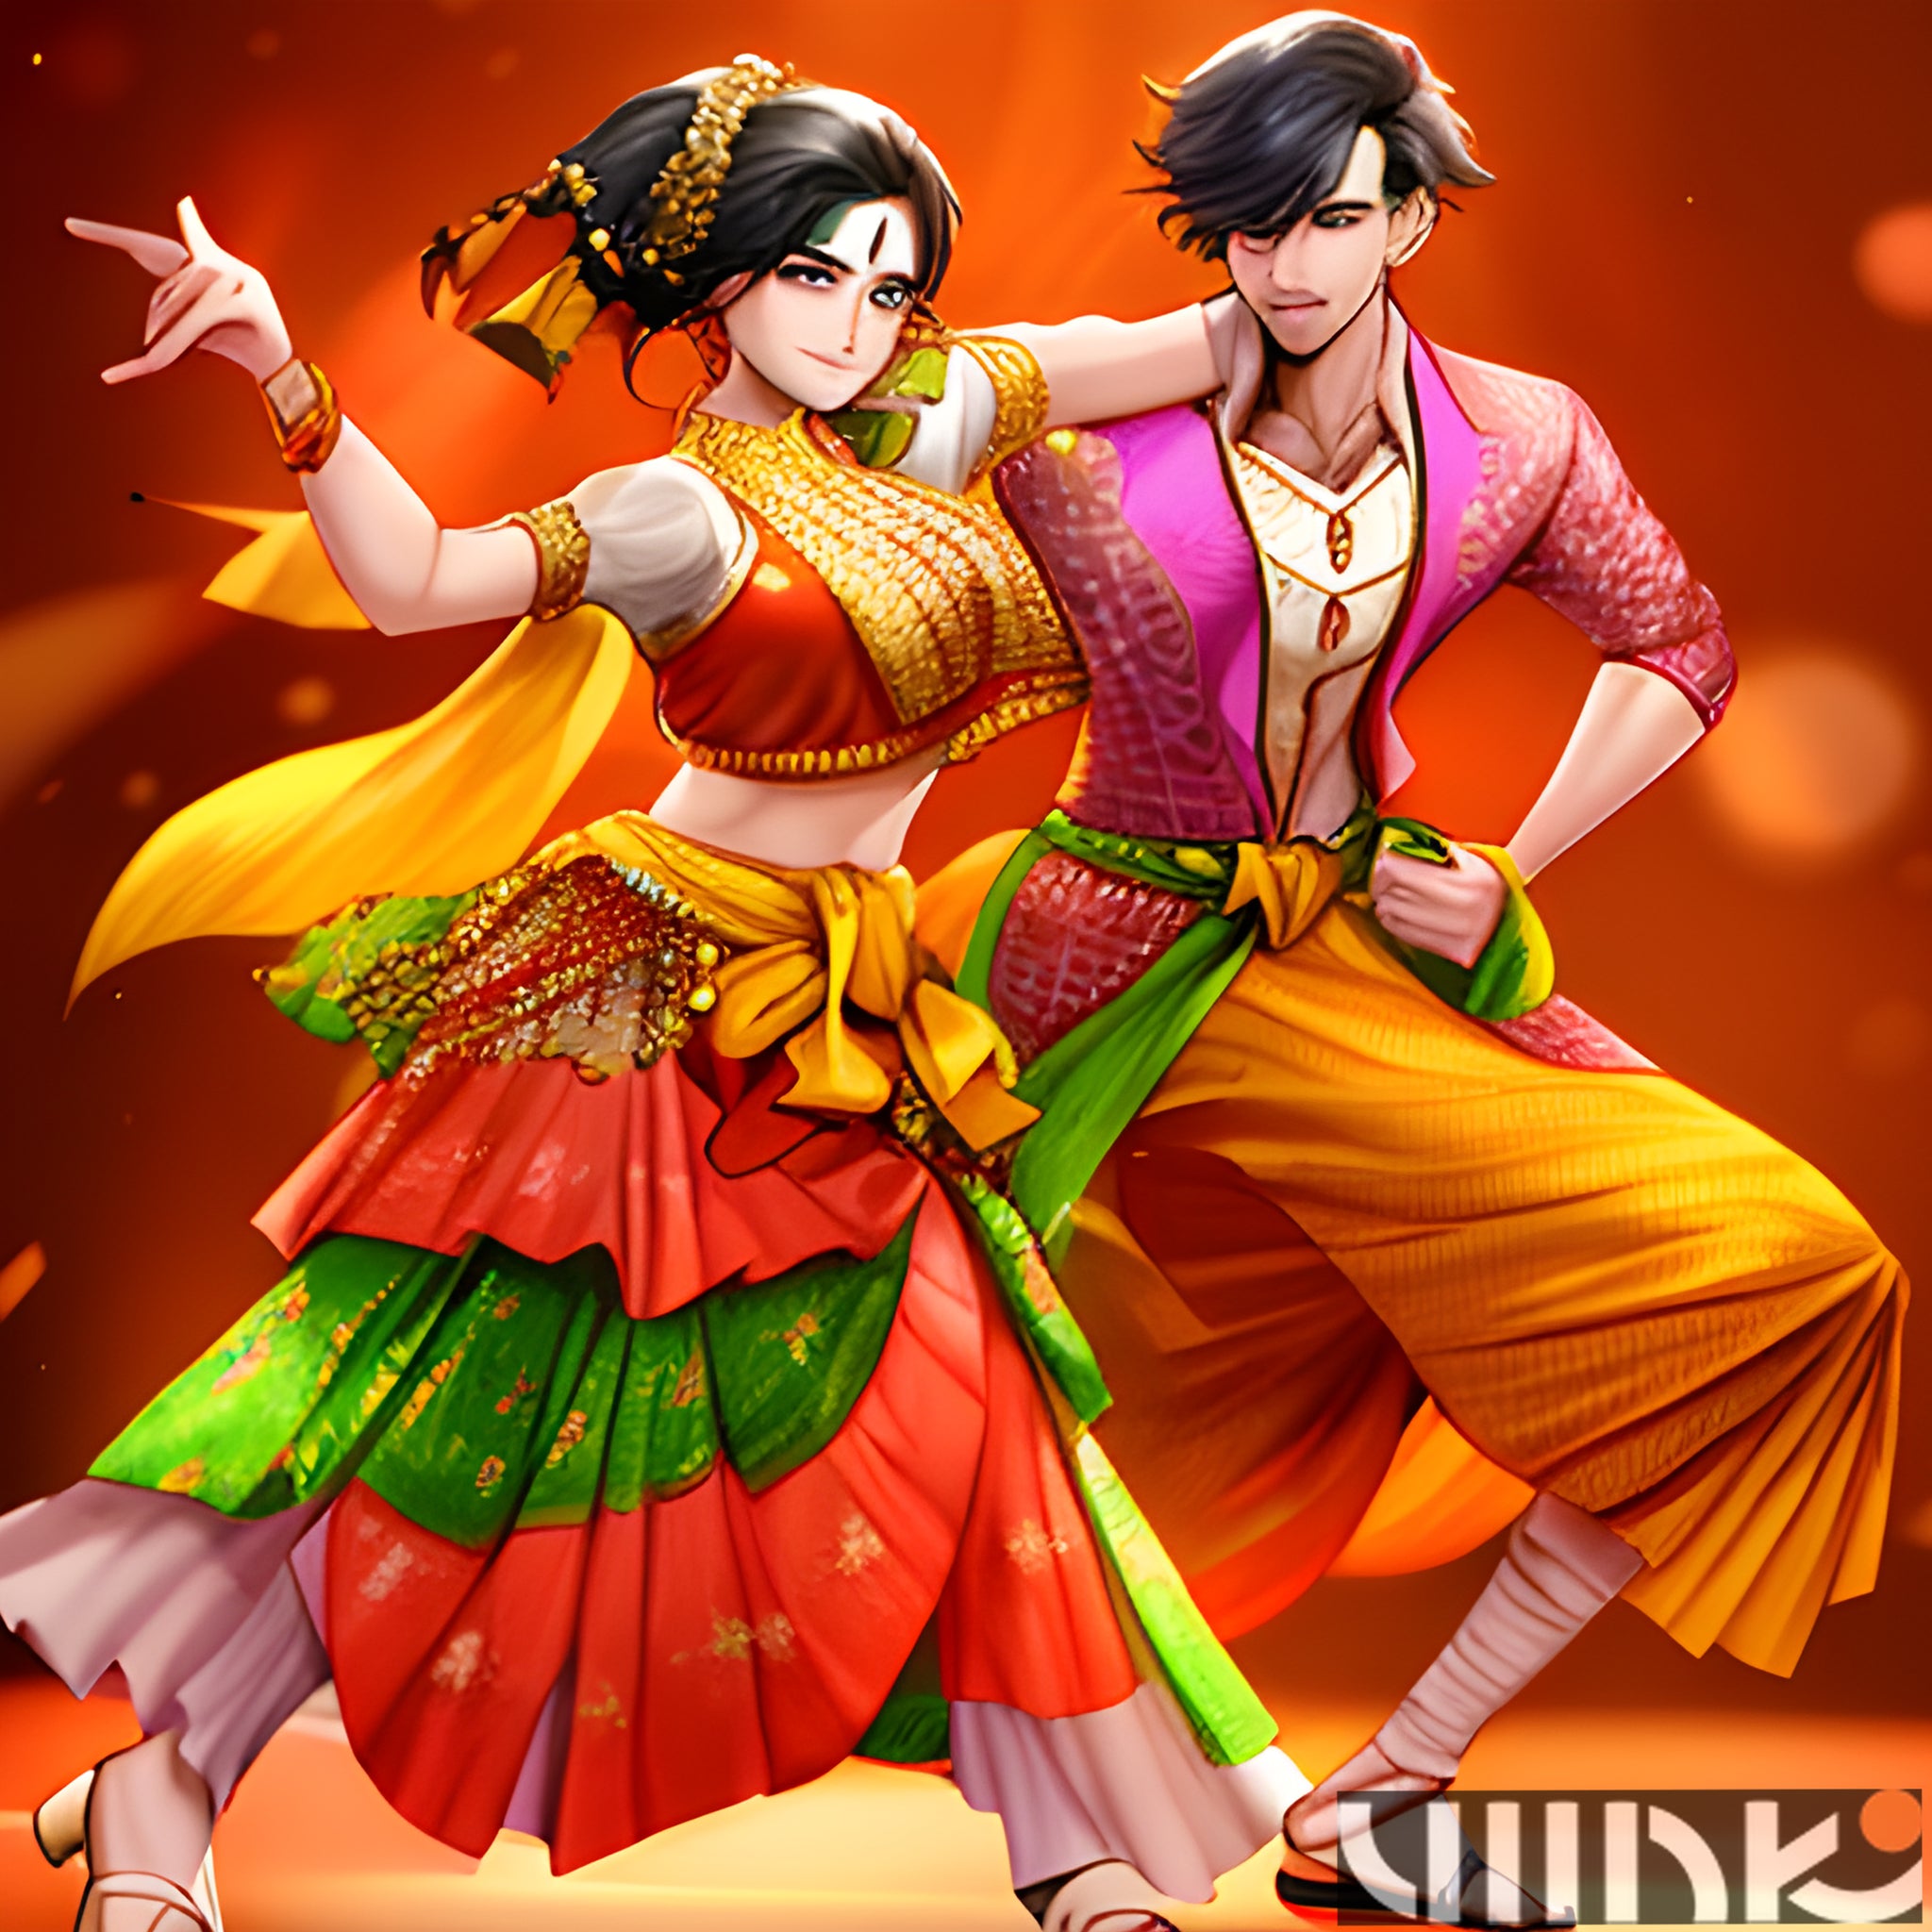 Lungi Dance: Unleash Your Inner Swagger and Join the Lungi Revolution!